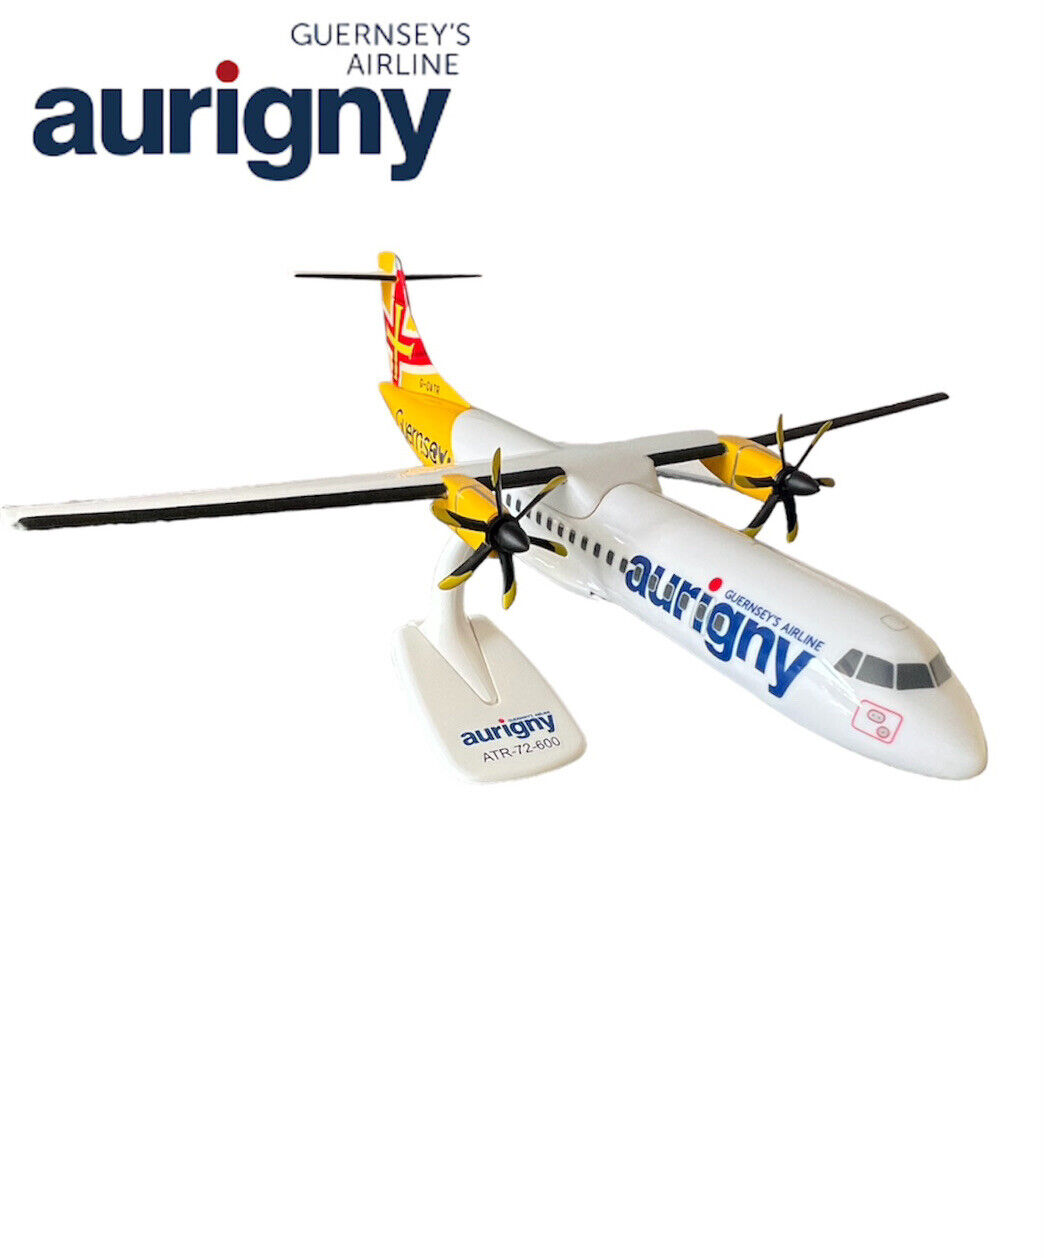 AURIGNY GUERNSEY ATR-72-600 1/100 Scale Push Fit Model Aircraft. New In Box